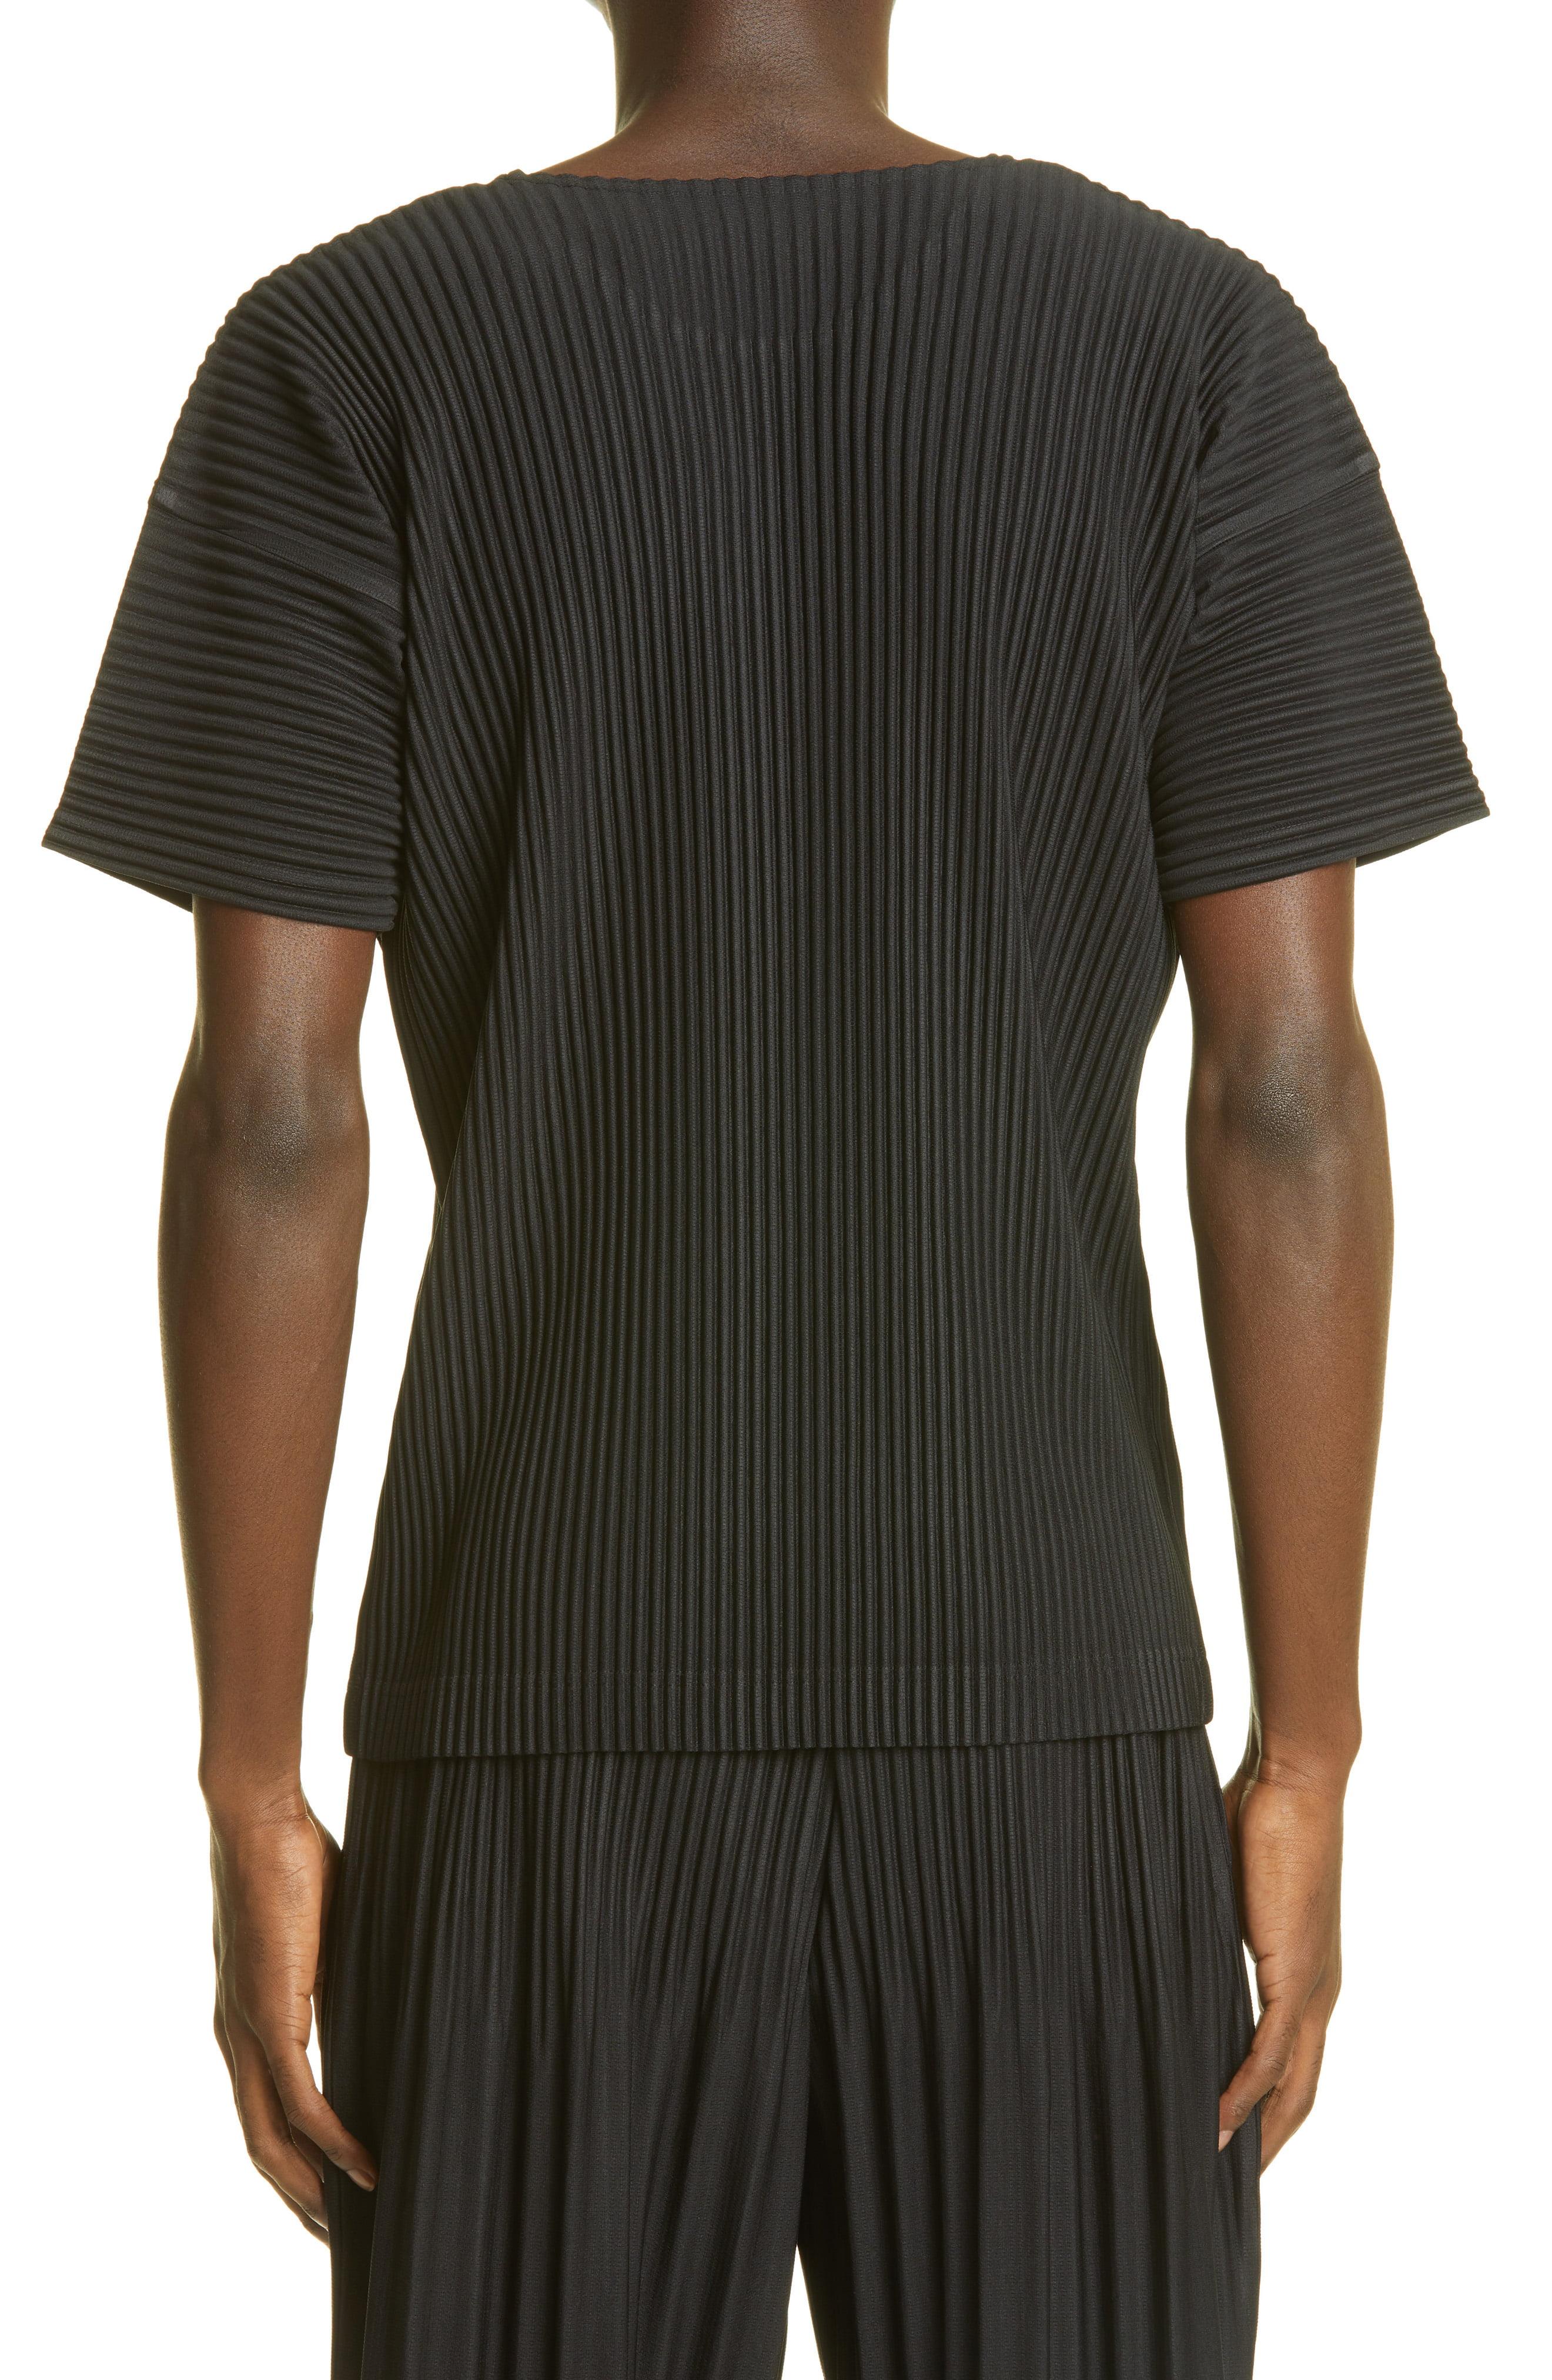 Homme Plissé Issey Miyake Basic Pleated T-shirt in Black for Men - Lyst